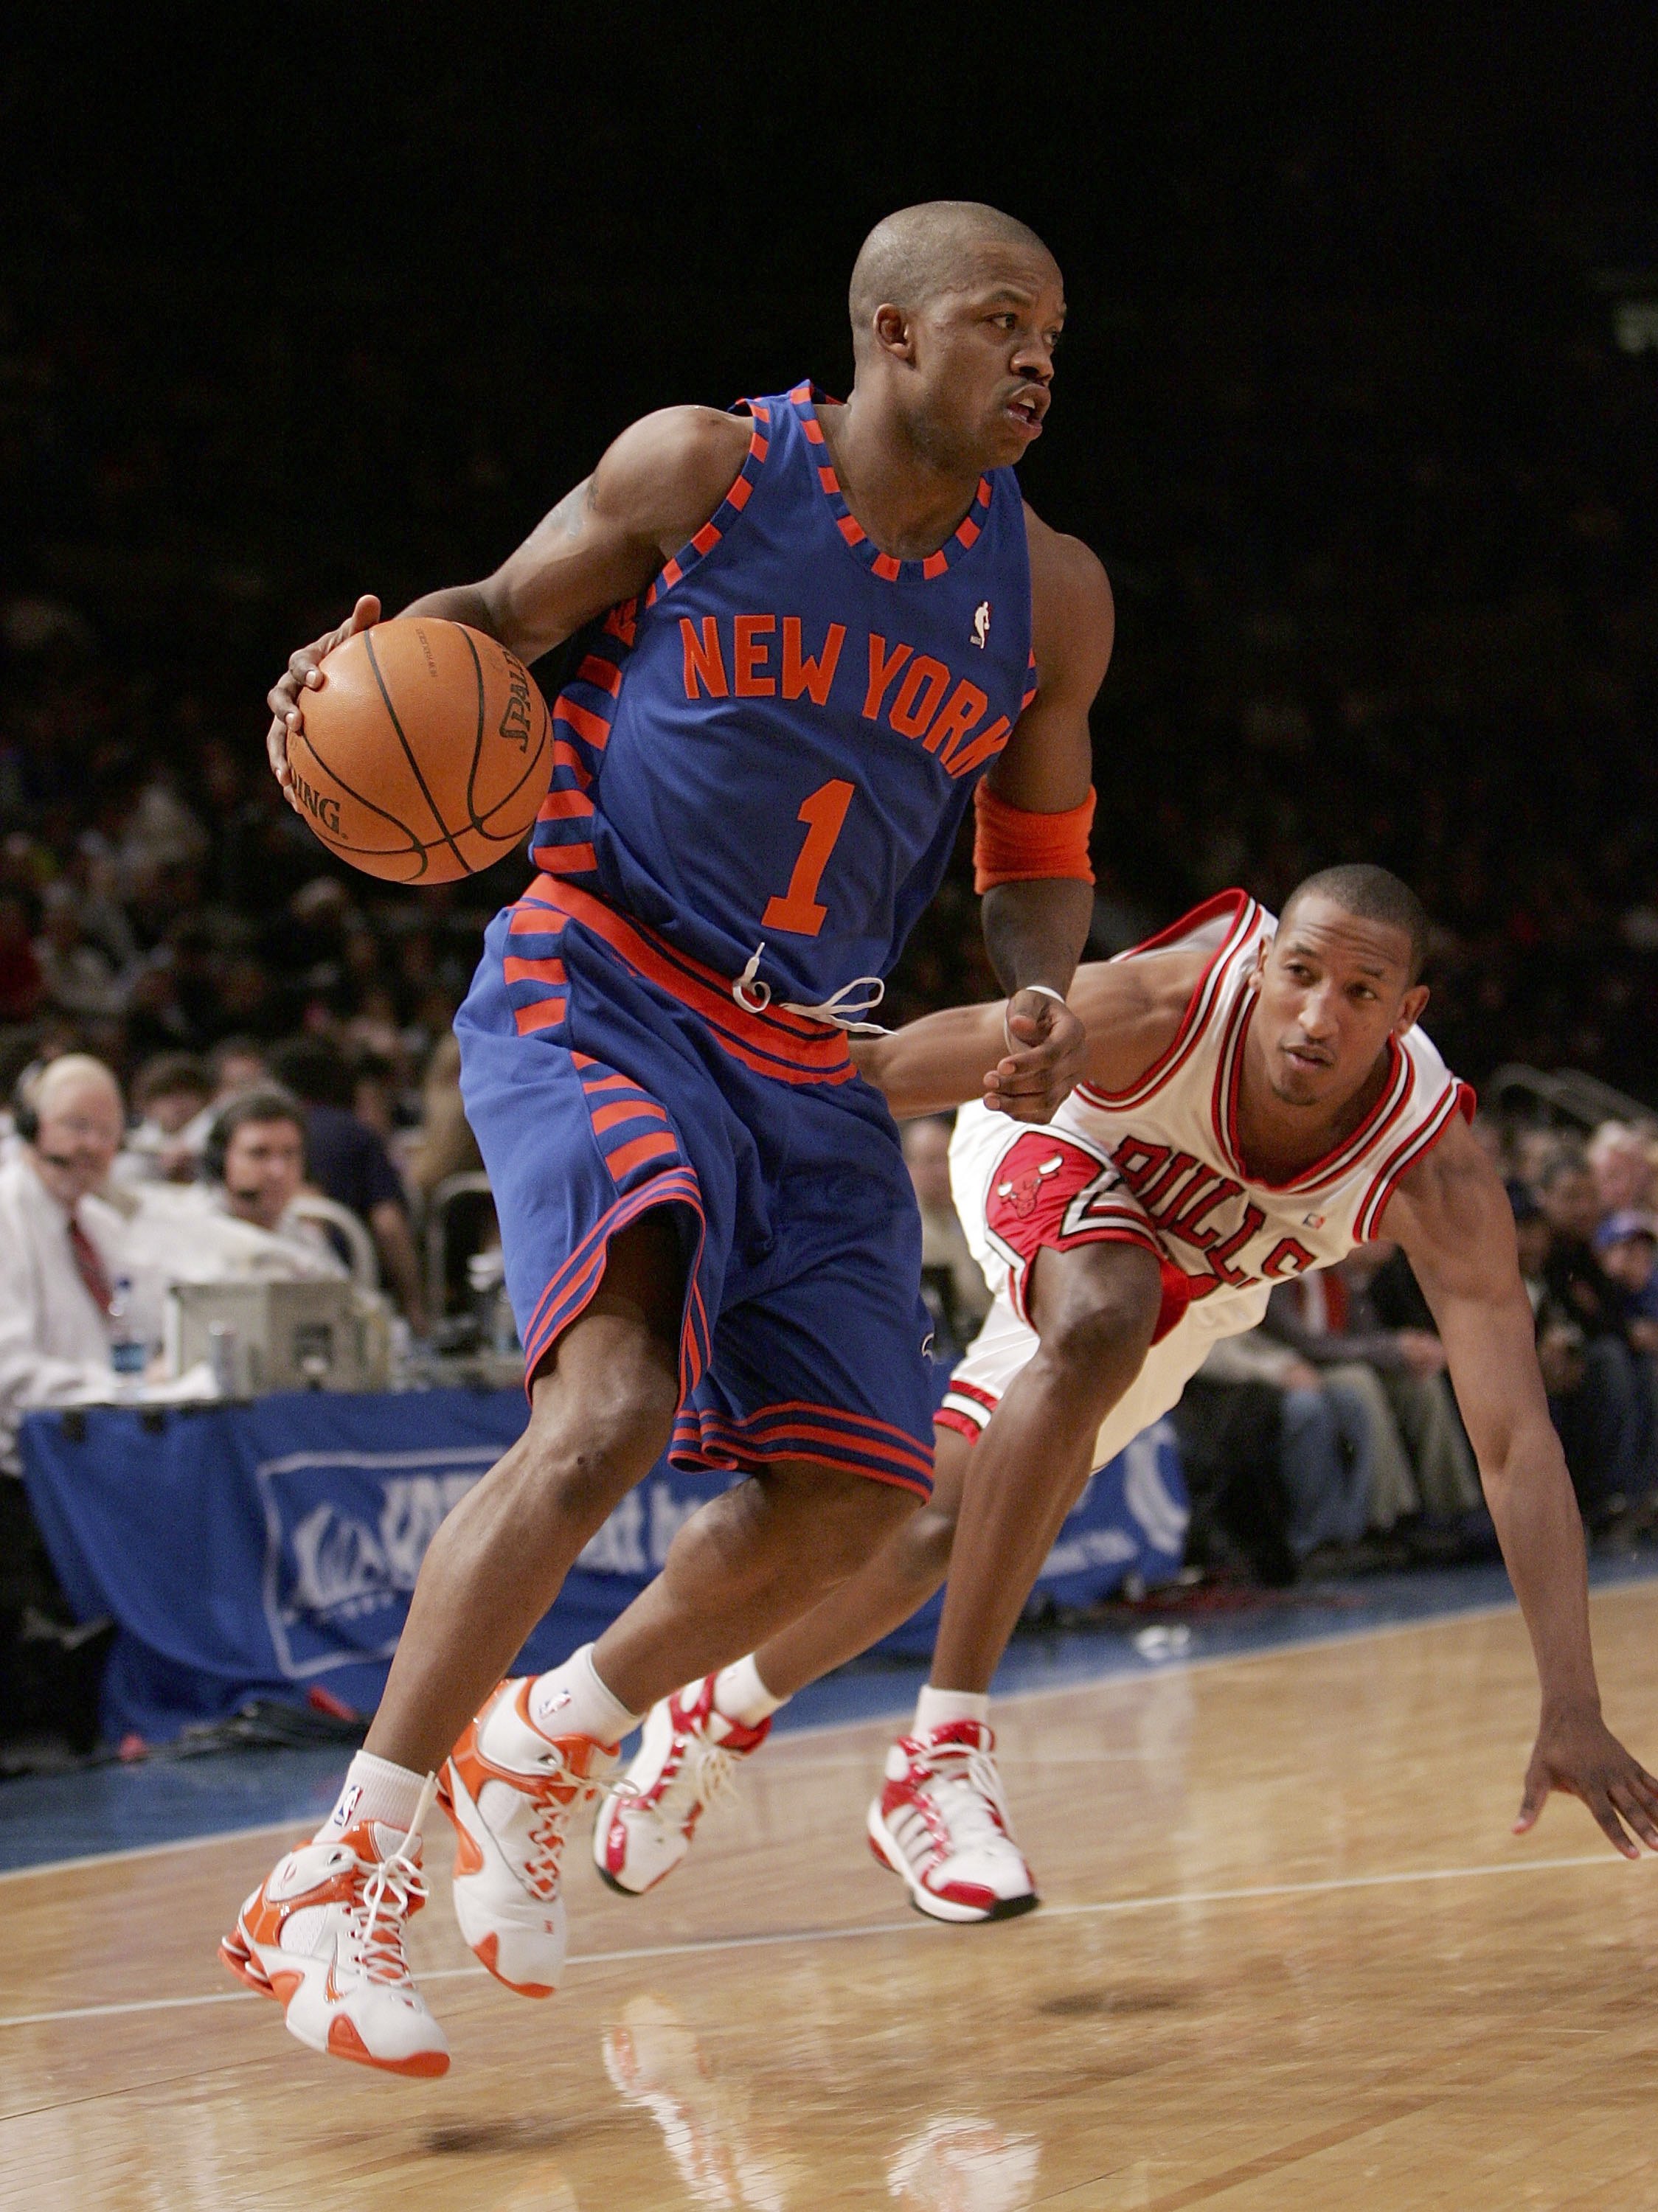 NEW YORK - MARCH 3:  Steve Francis #1 of the New York Knicks drives to the basket against Chris Duhon #21 of the Chicago Bulls on March 3, 2006 at Madison Square Garden in New York City. The Bulls defeated the Knicks 108-101.  NOTE TO USER: User expressly